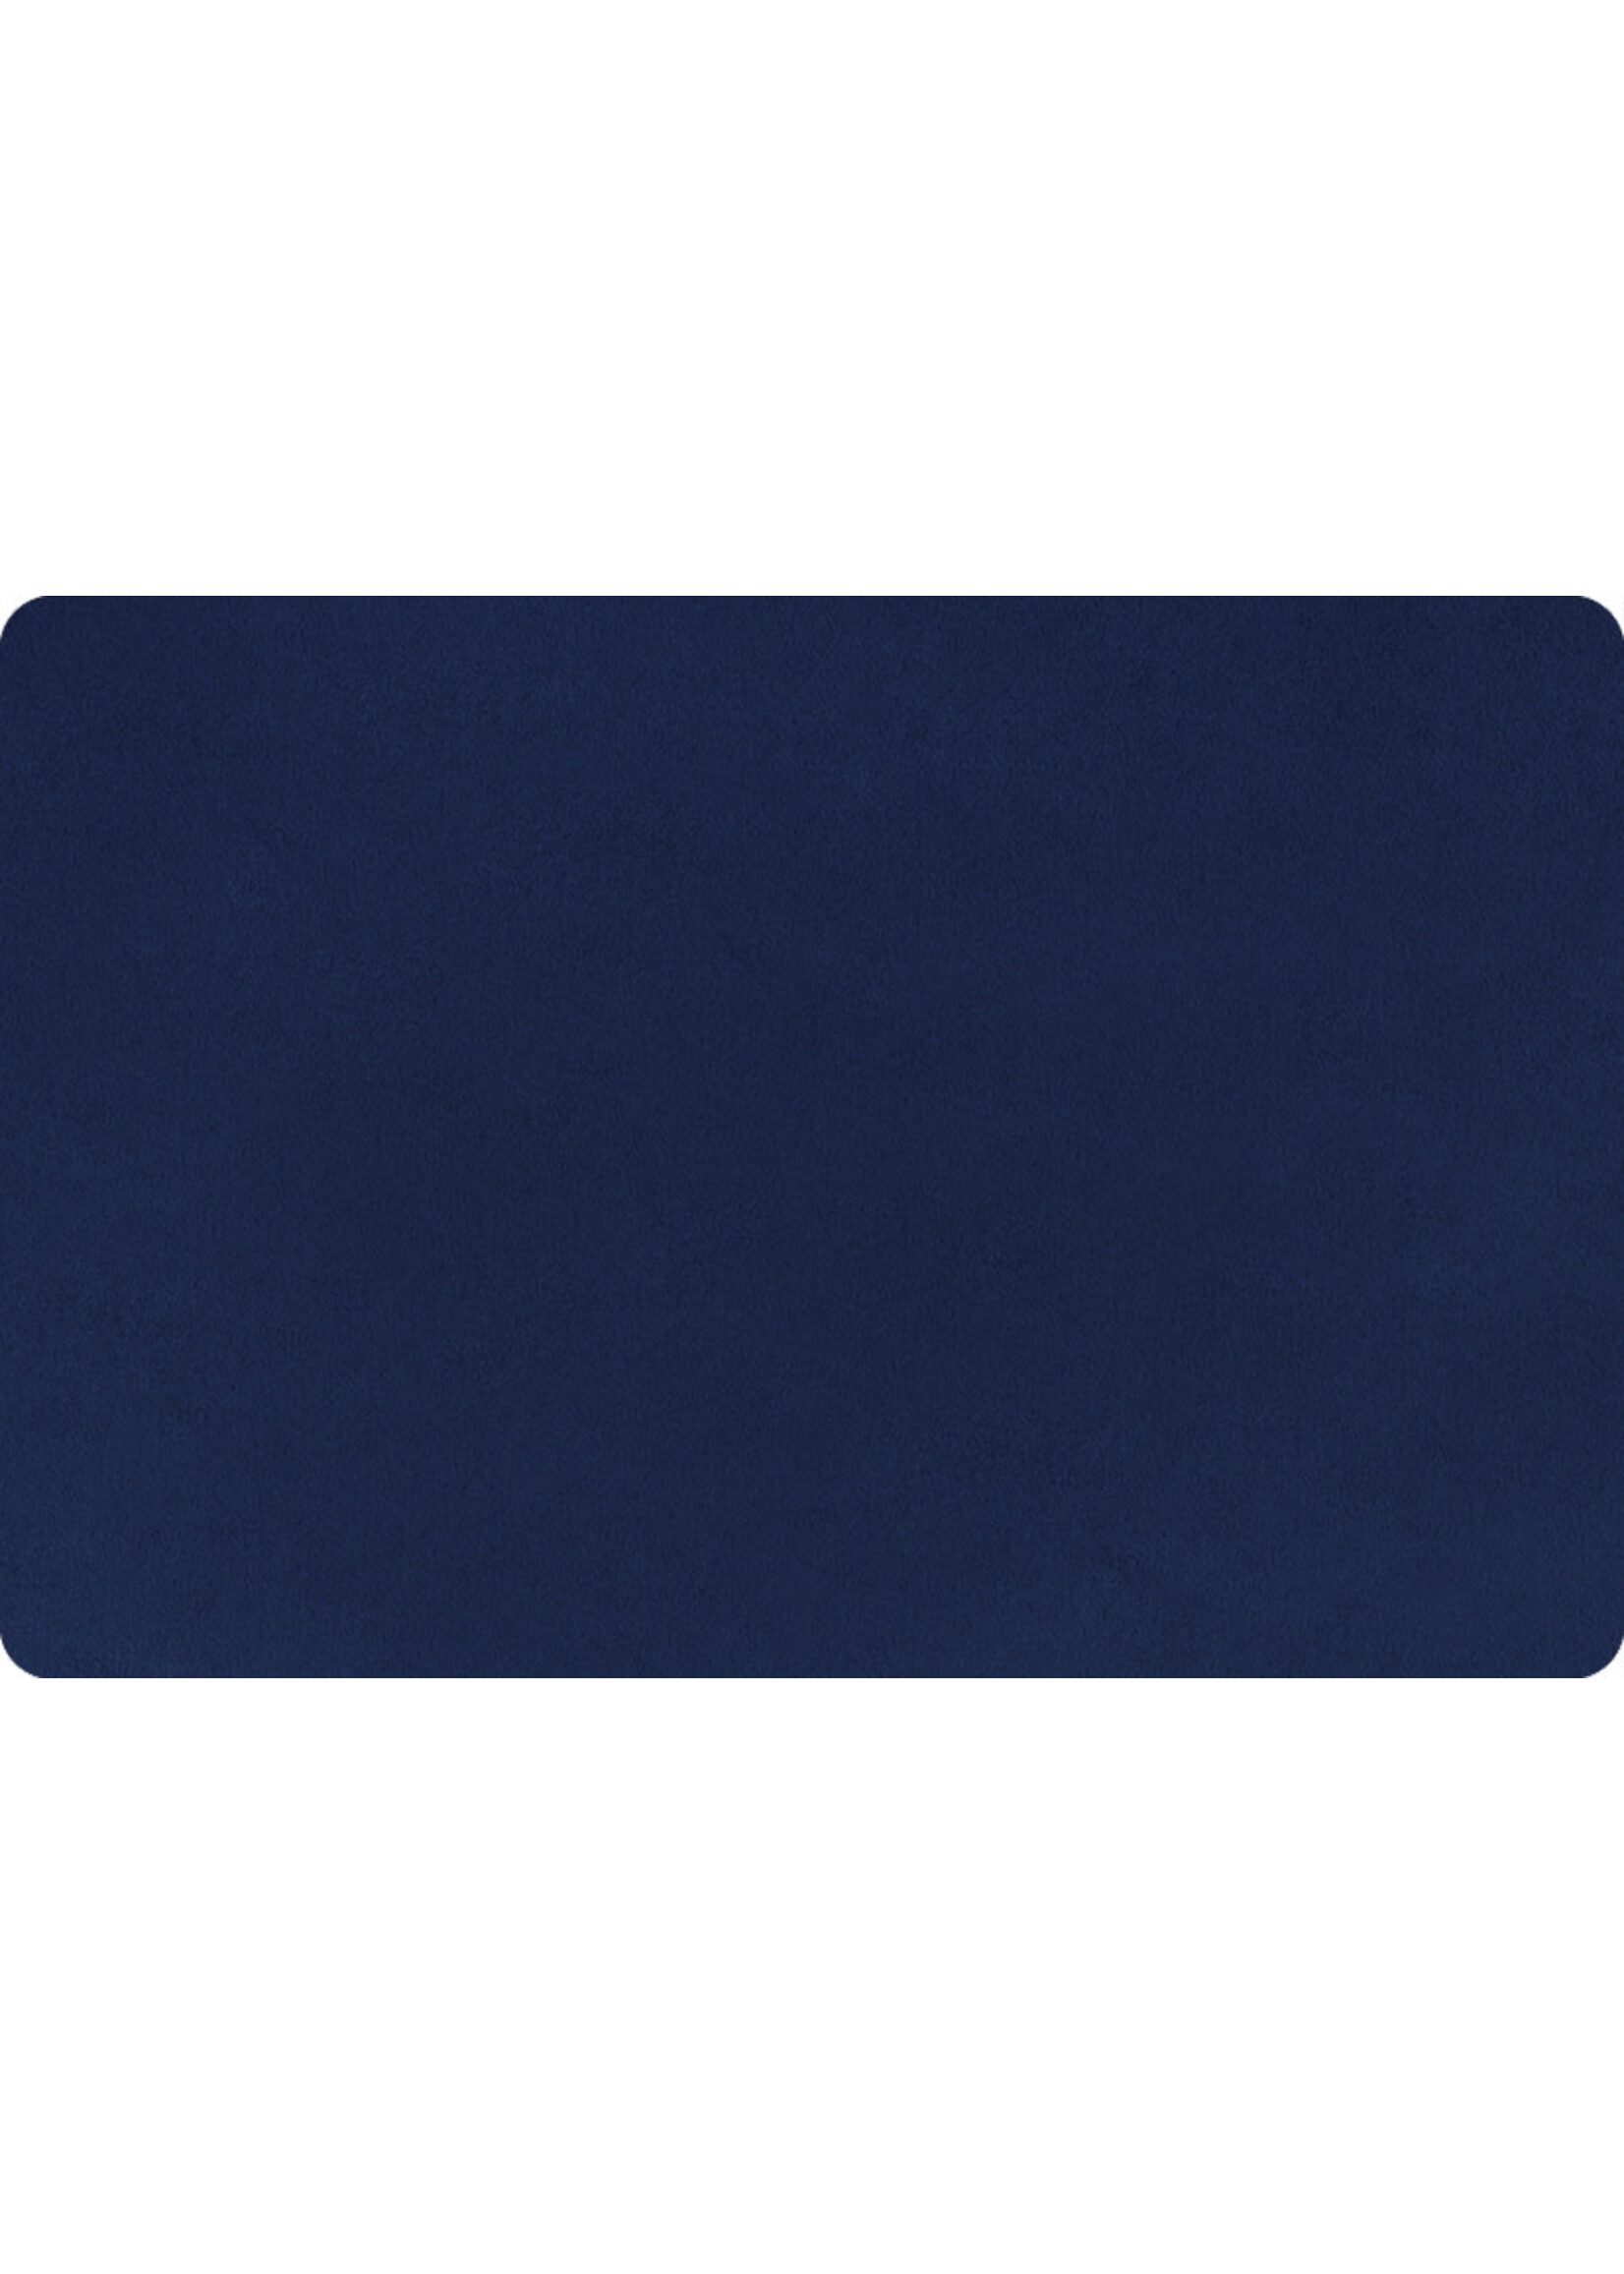 Shannon Fabrics Minky, Extra Wide Solid Cuddle3, 90" Midnight, (by the inch)